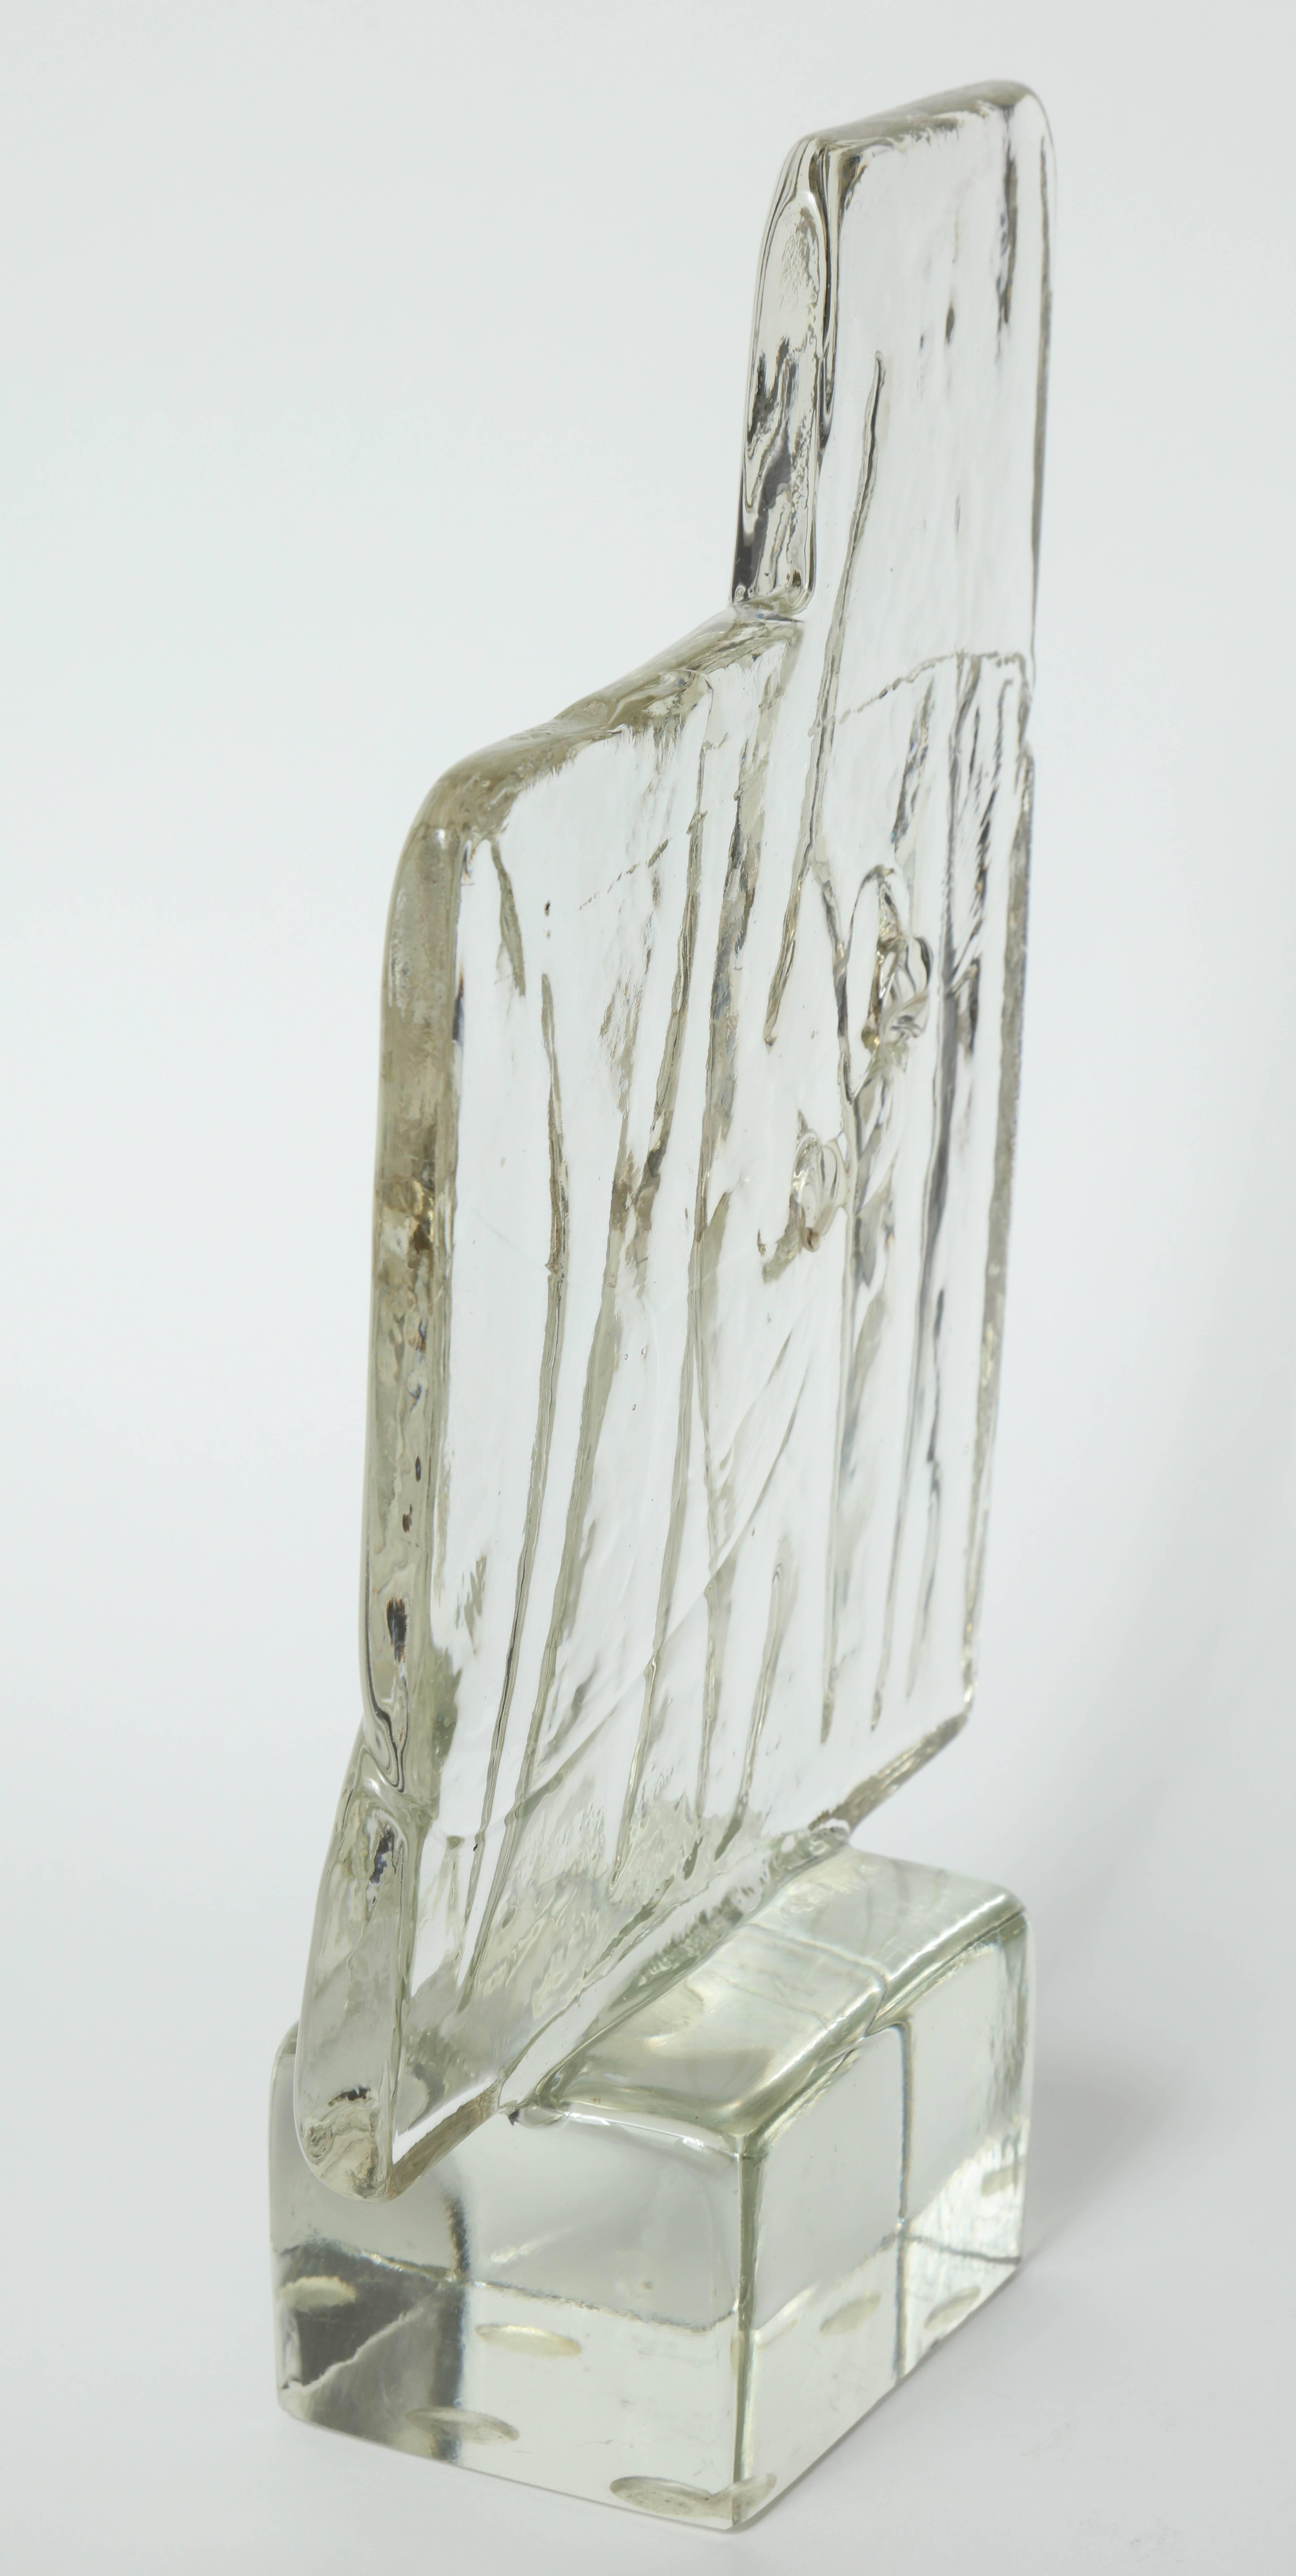 Modernist clear textured abstract Murano glass blade sculpture with two open spaces resting on a solid glass base. Signed.